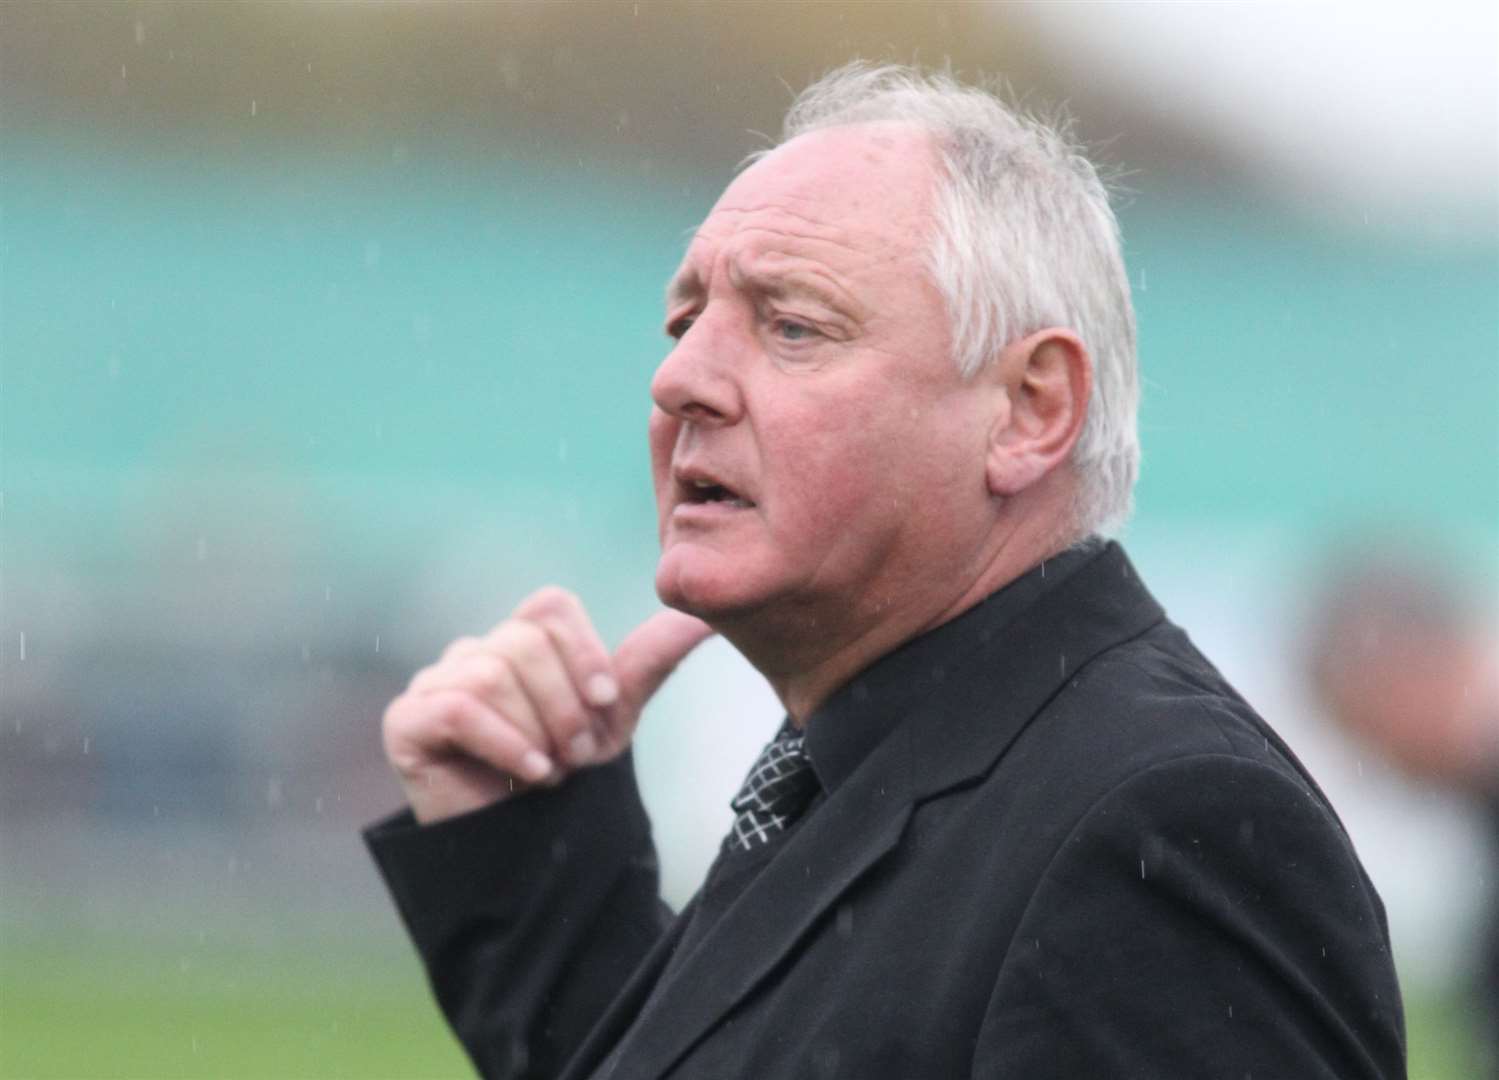 Neil Cugley, Manager for Folkestone. Picture: John Westhrop FM4077133 (8236543)